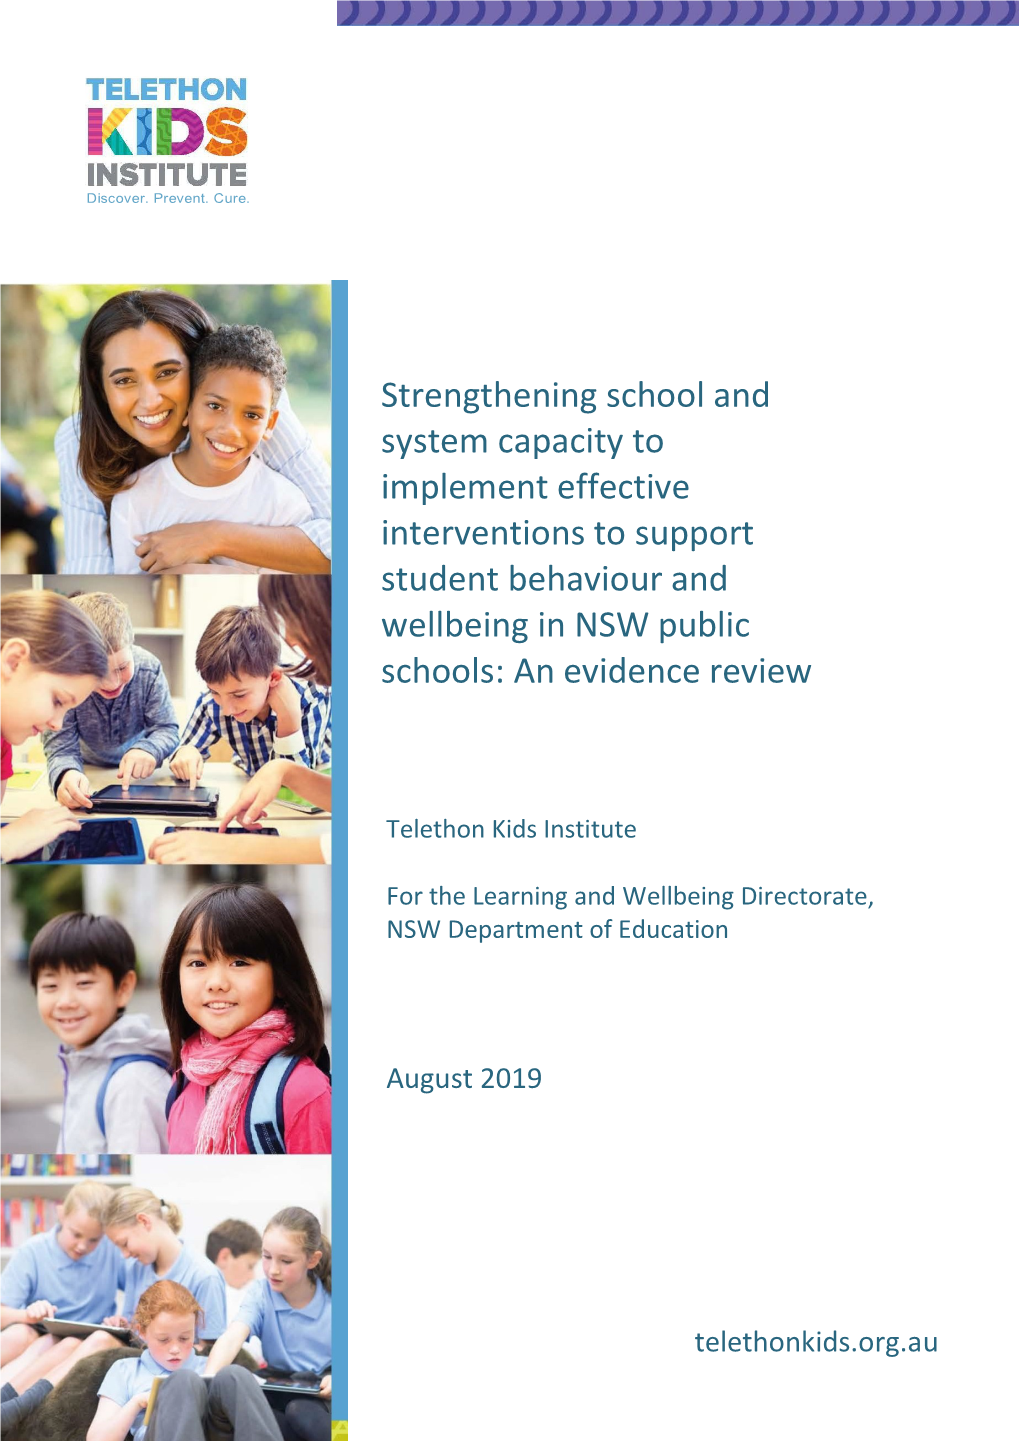 Strengthening School and System Capacity to Implement Effective Interventions to Support Student Behaviour and Wellbeing in NSW Public Schools: an Evidence Review